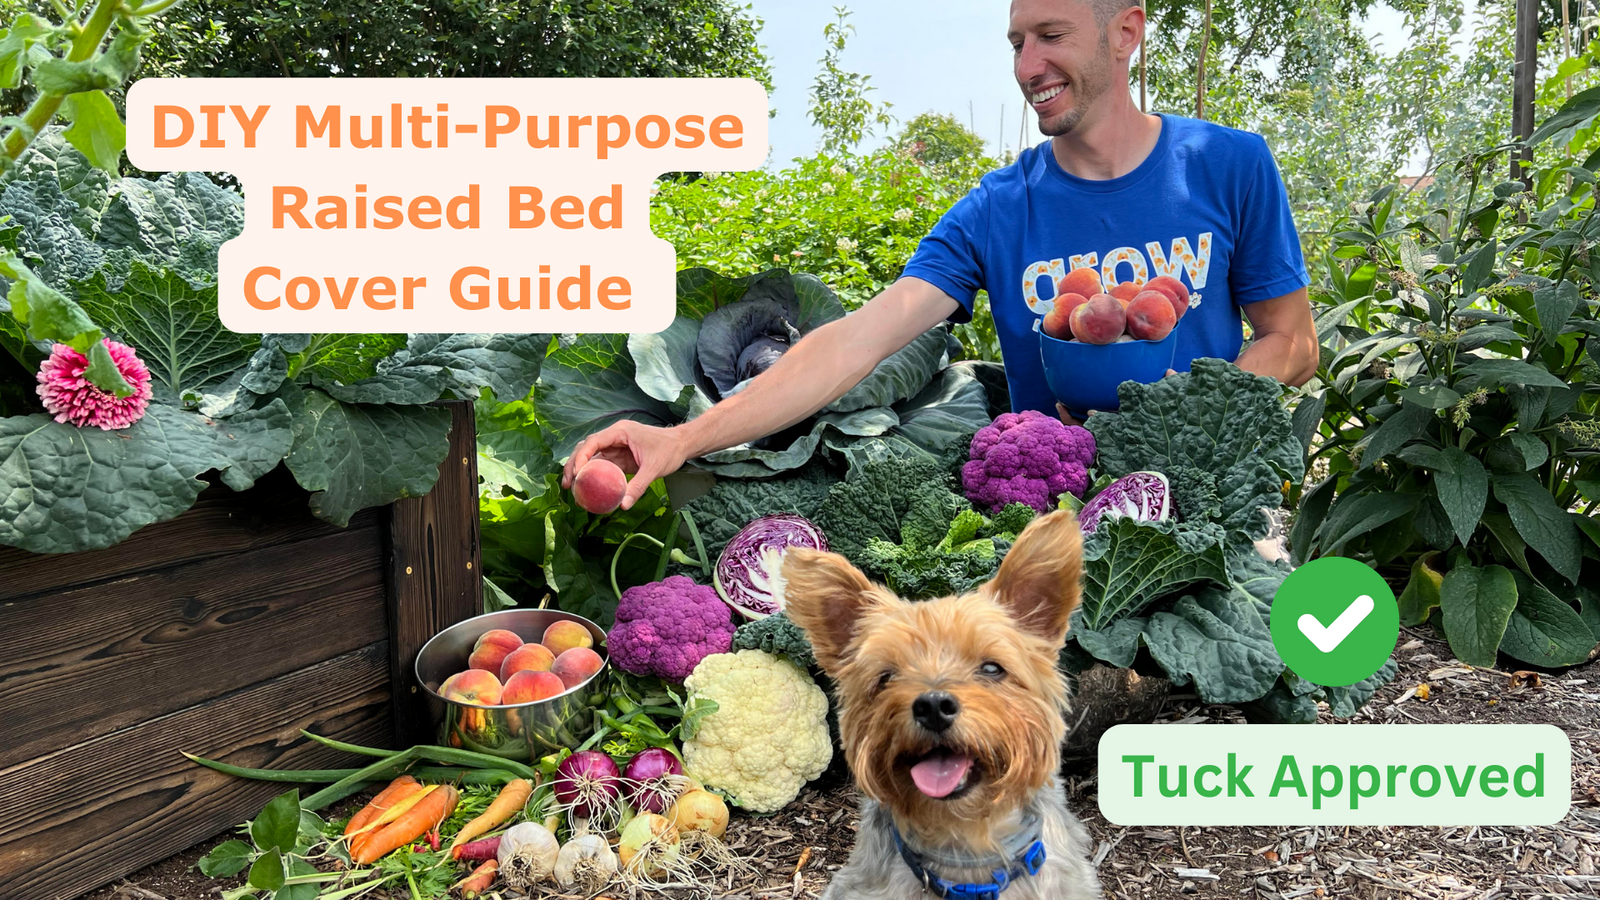 James Prigioni’s Detailed Guide to Crafting the Ultimate Raised Bed Cover